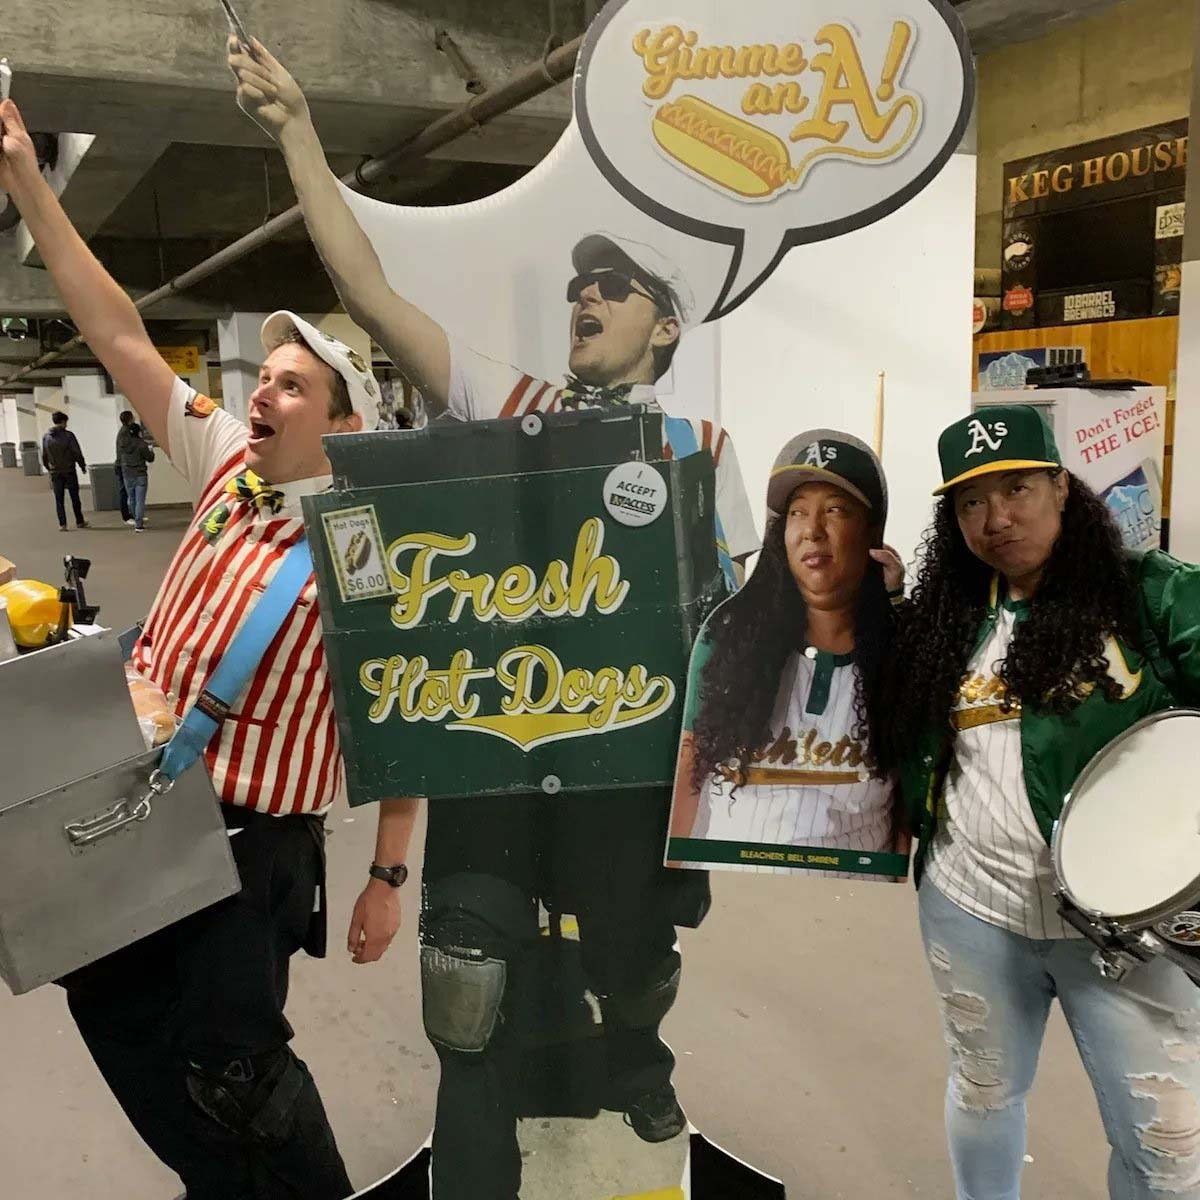 Hot dog vendor and a fan pose dramatically next to cardboard cutouts of themselves.